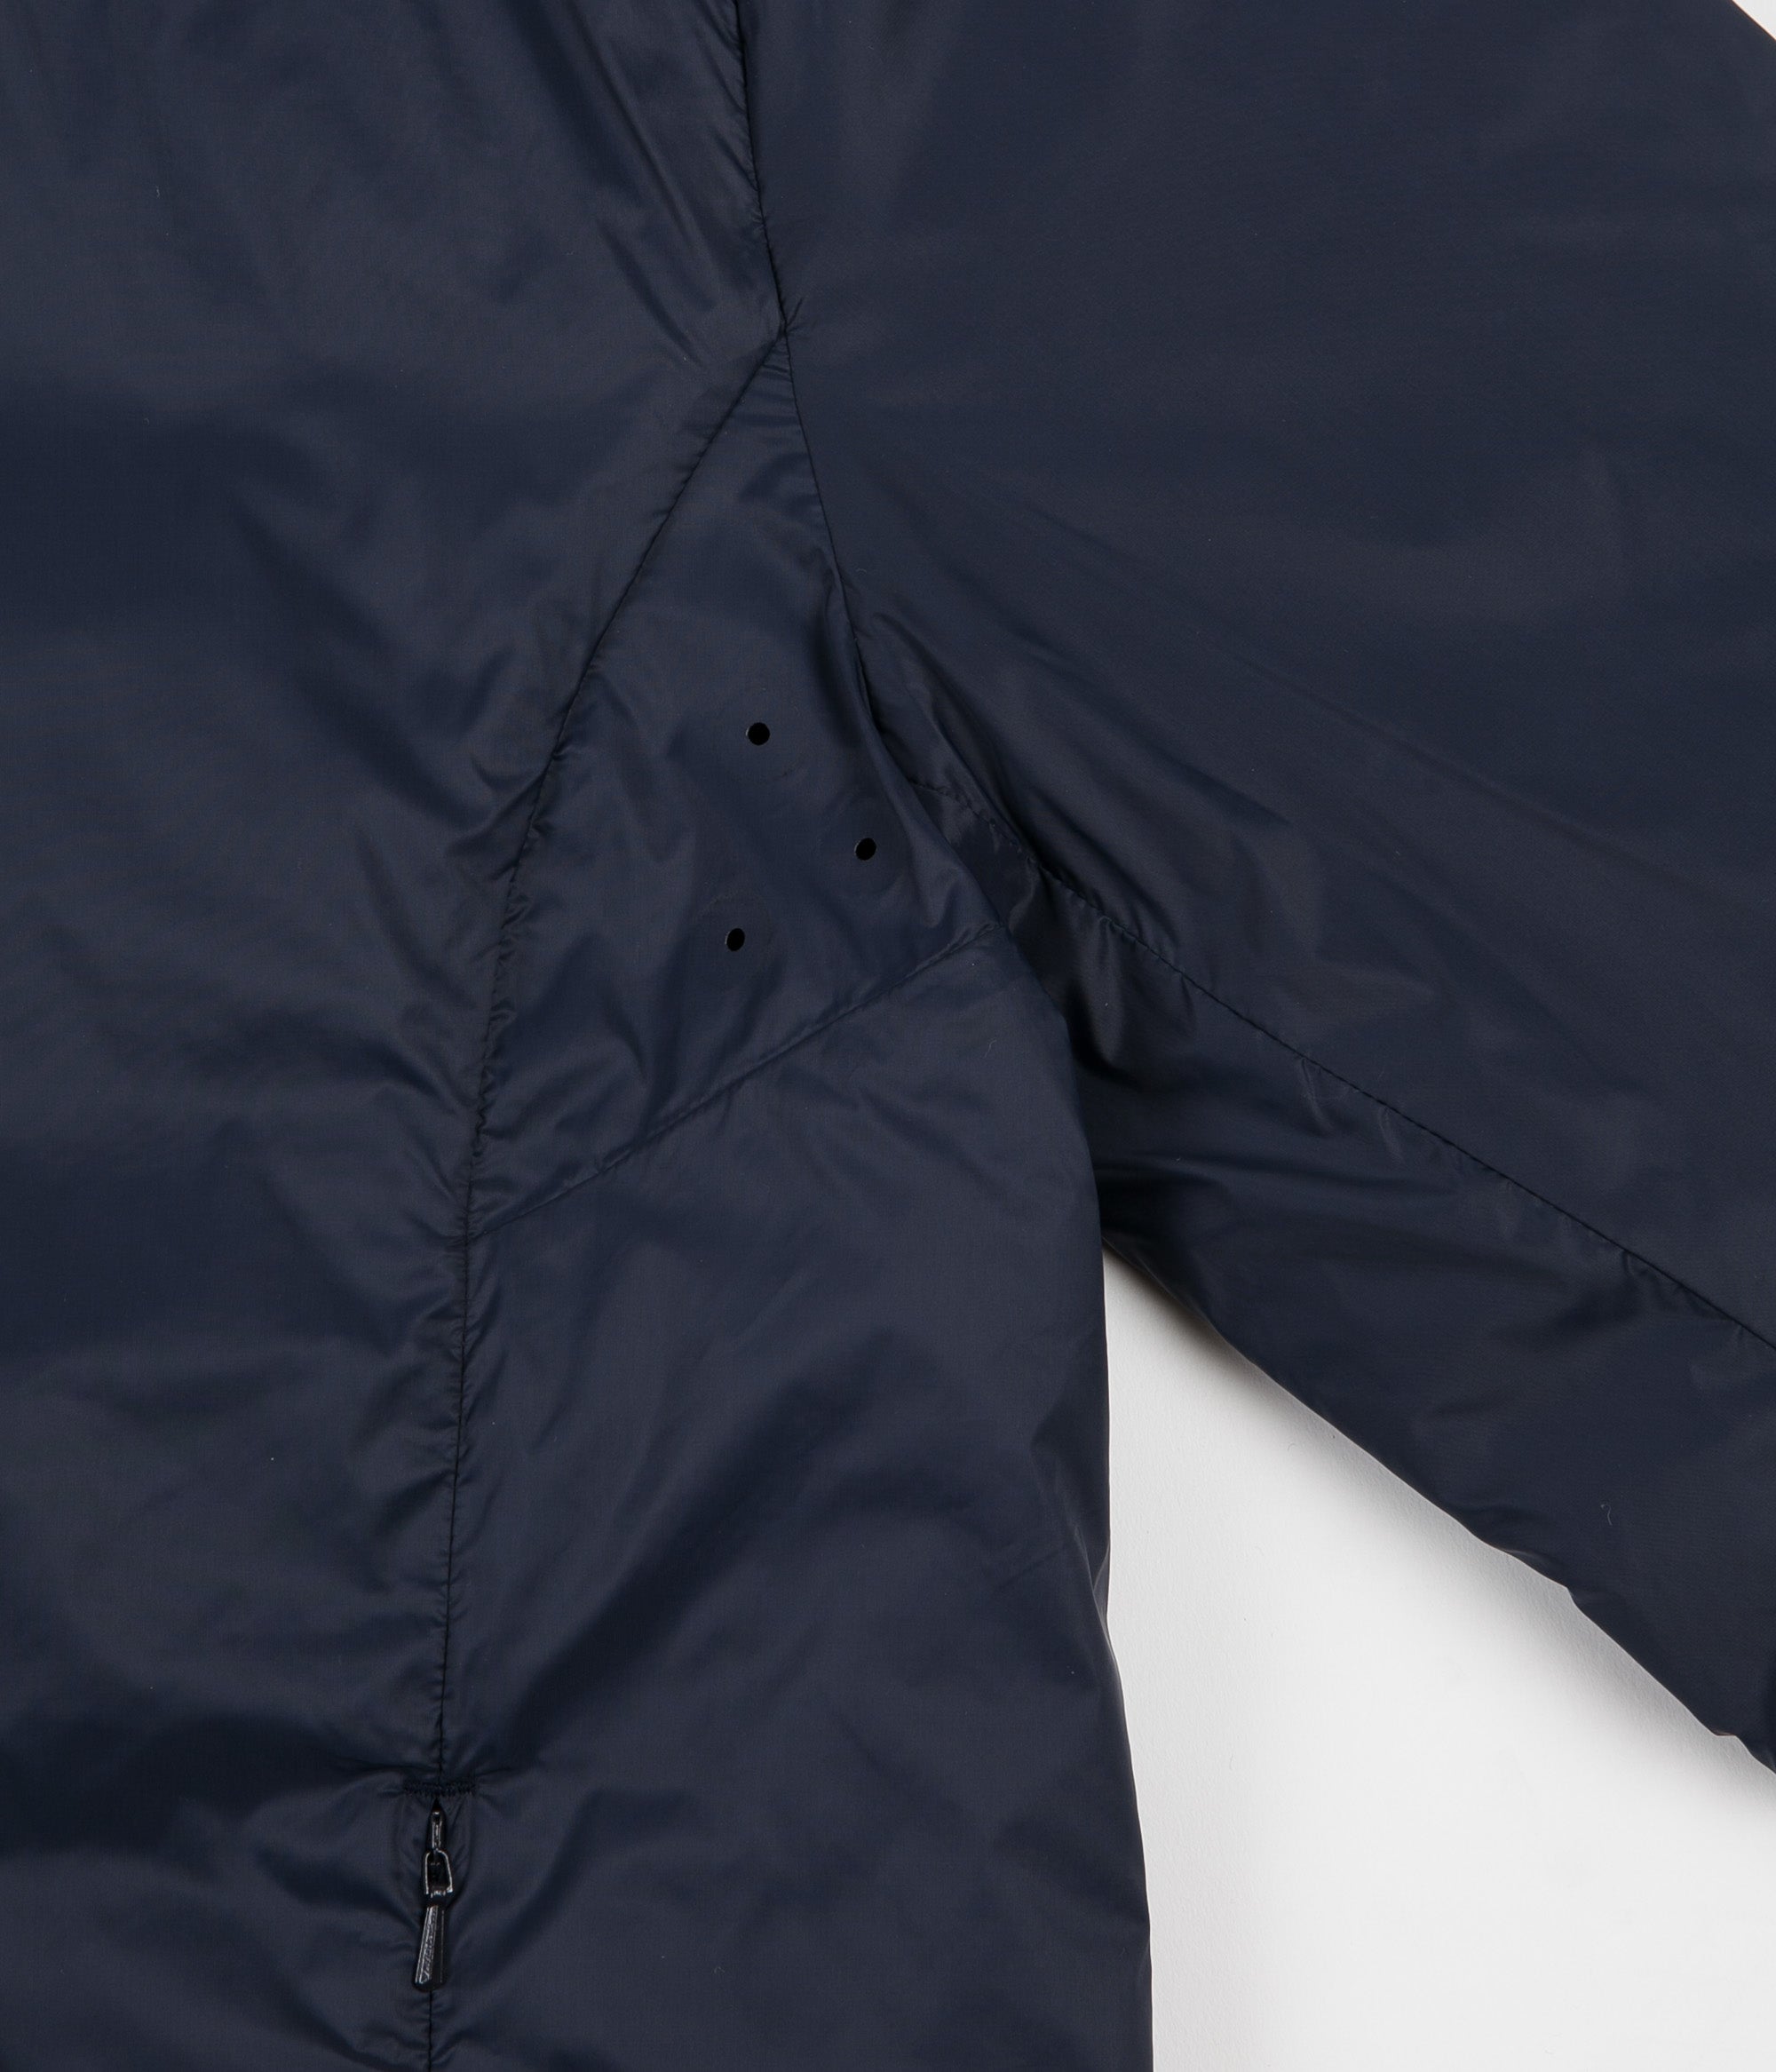 norse projects hugo 2.0 jacket